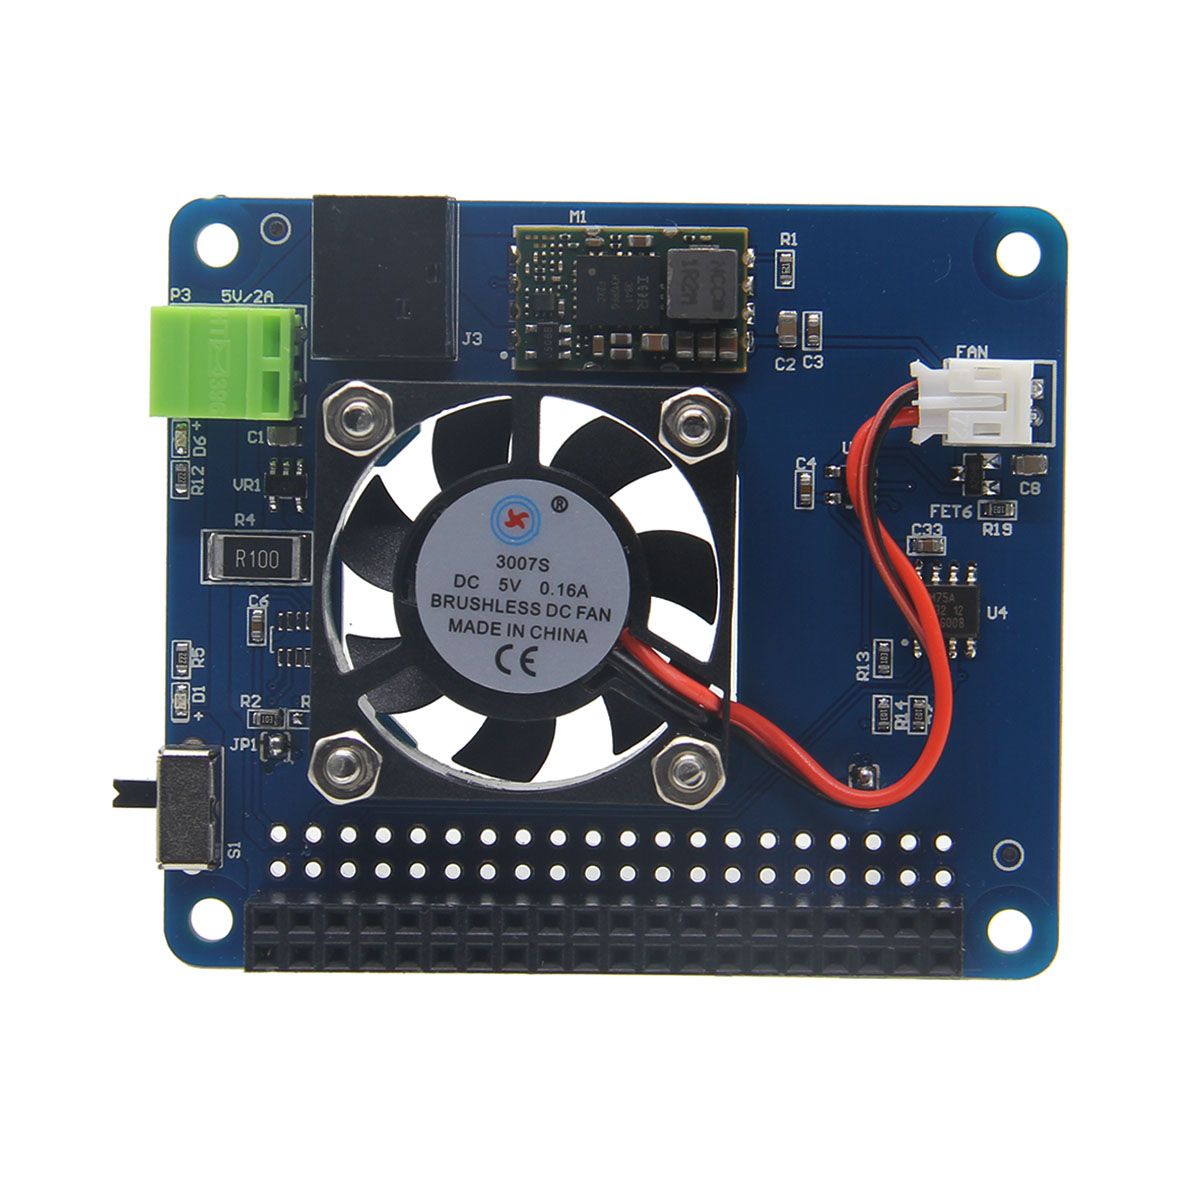 Programmable-Smart-Temperature-Control-Fan-and-Power-Expansion-Board-For-Raspberry-Pi-1146979